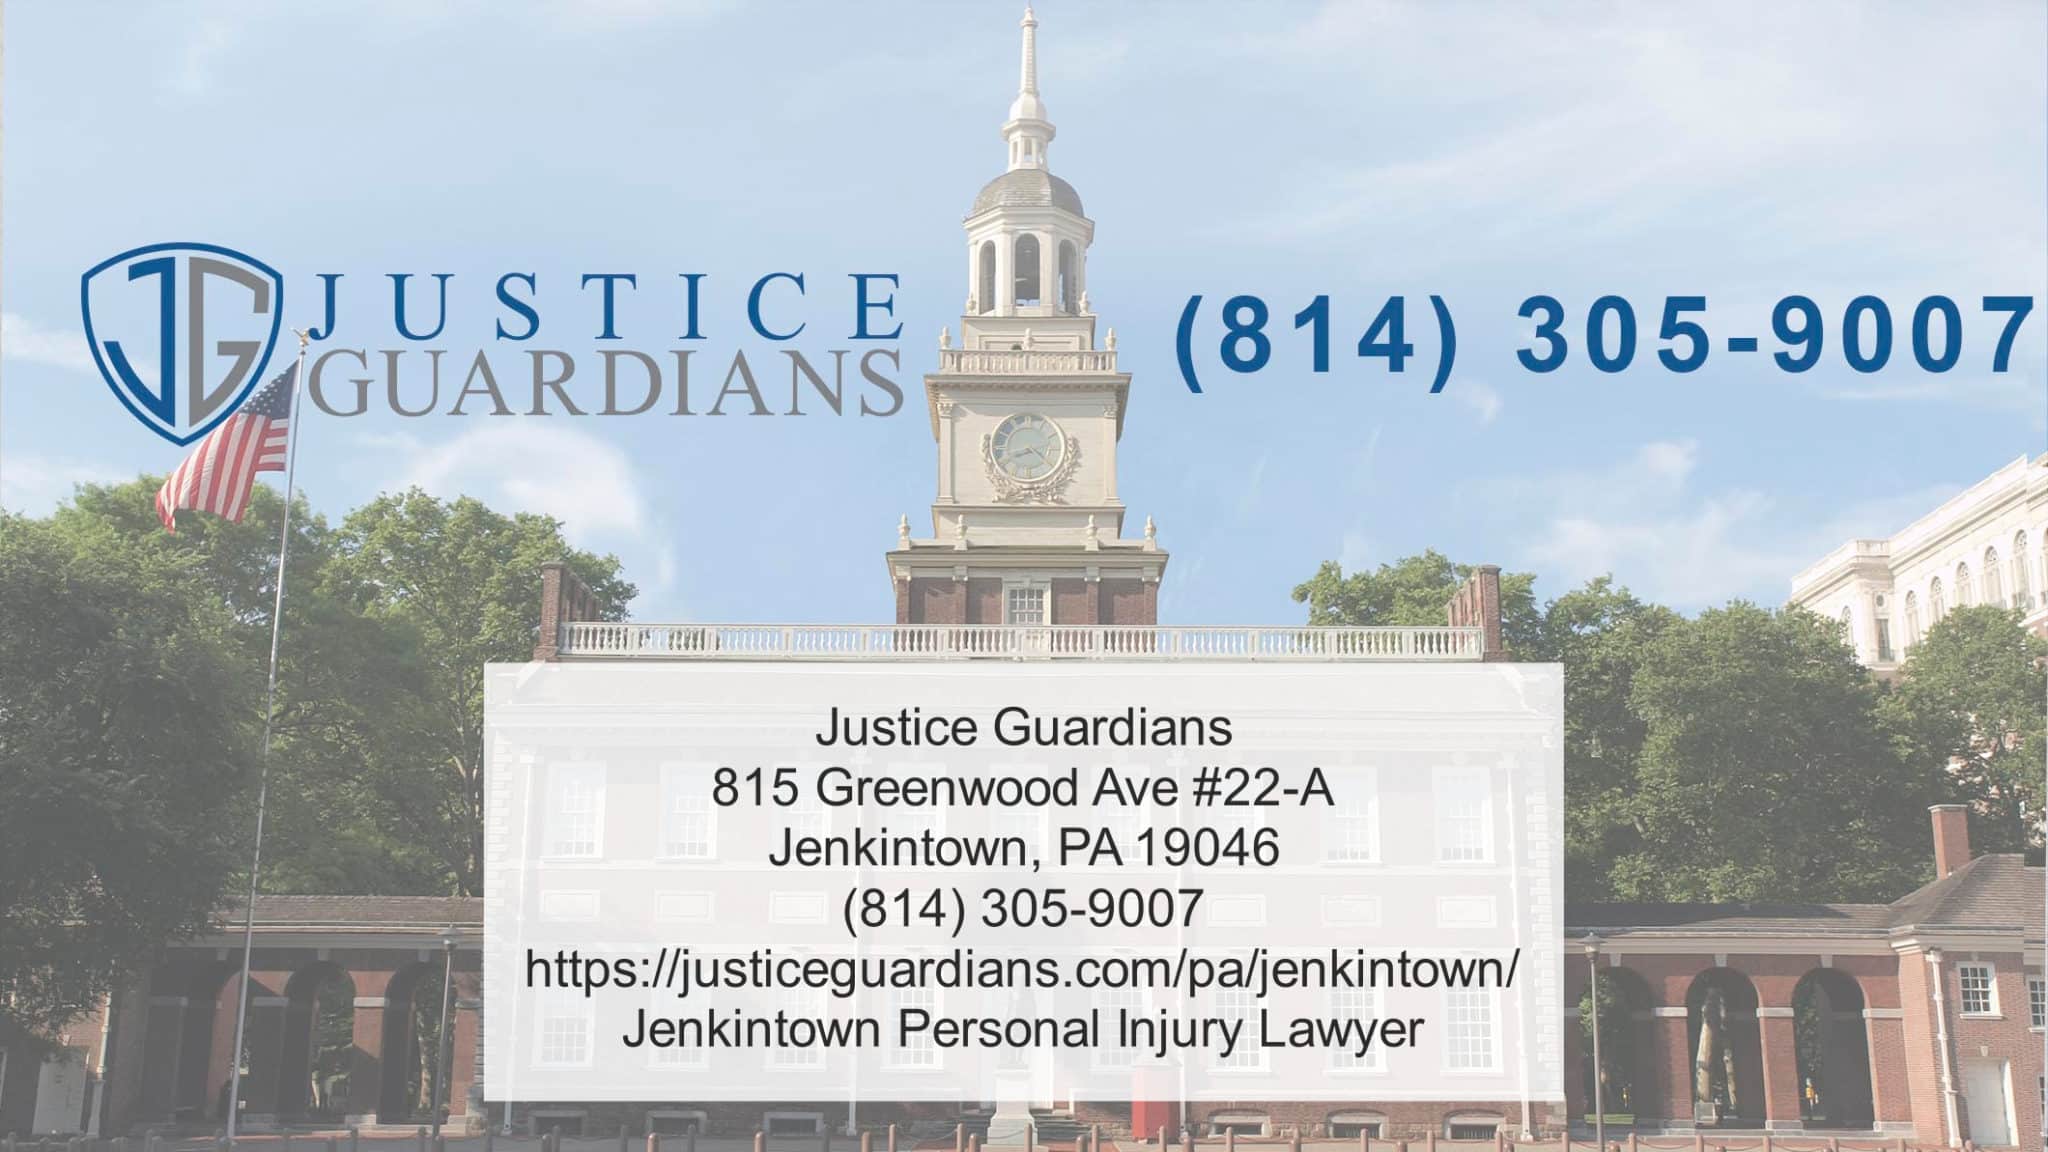 File A Wrongful Death Case With This Jenkintown Personal Injury Law Firm